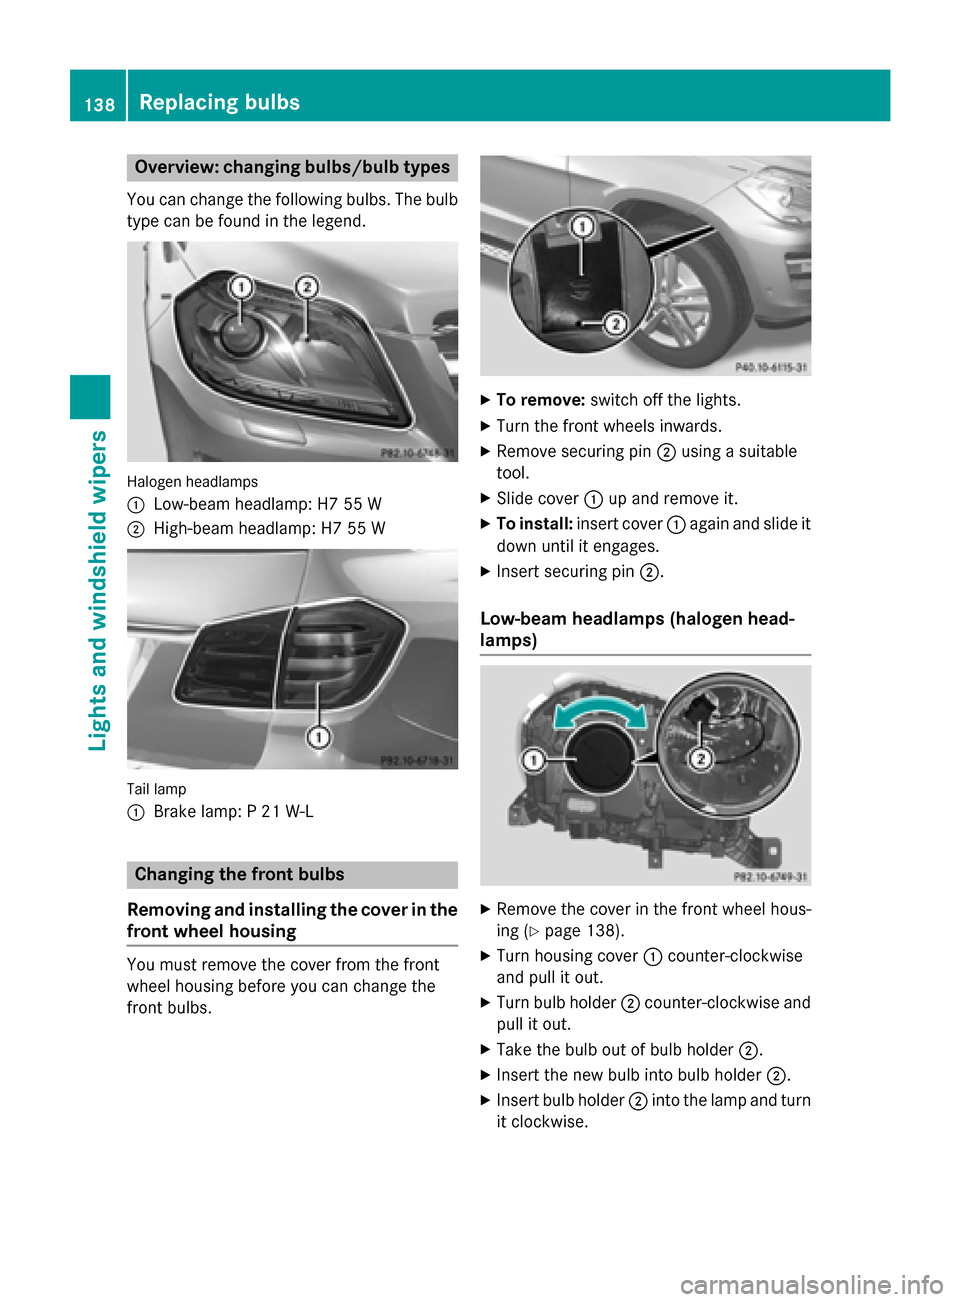 MERCEDES-BENZ GL-Class 2015 X166 User Guide Overview: changing bulbs/bulb types
You can change the following bulbs. The bulb type can be found in the legend. Halogen headlamps
0043
Low-beam headlamp: H7 55 W
0044 High-beam headlamp: H7 55 W Tai